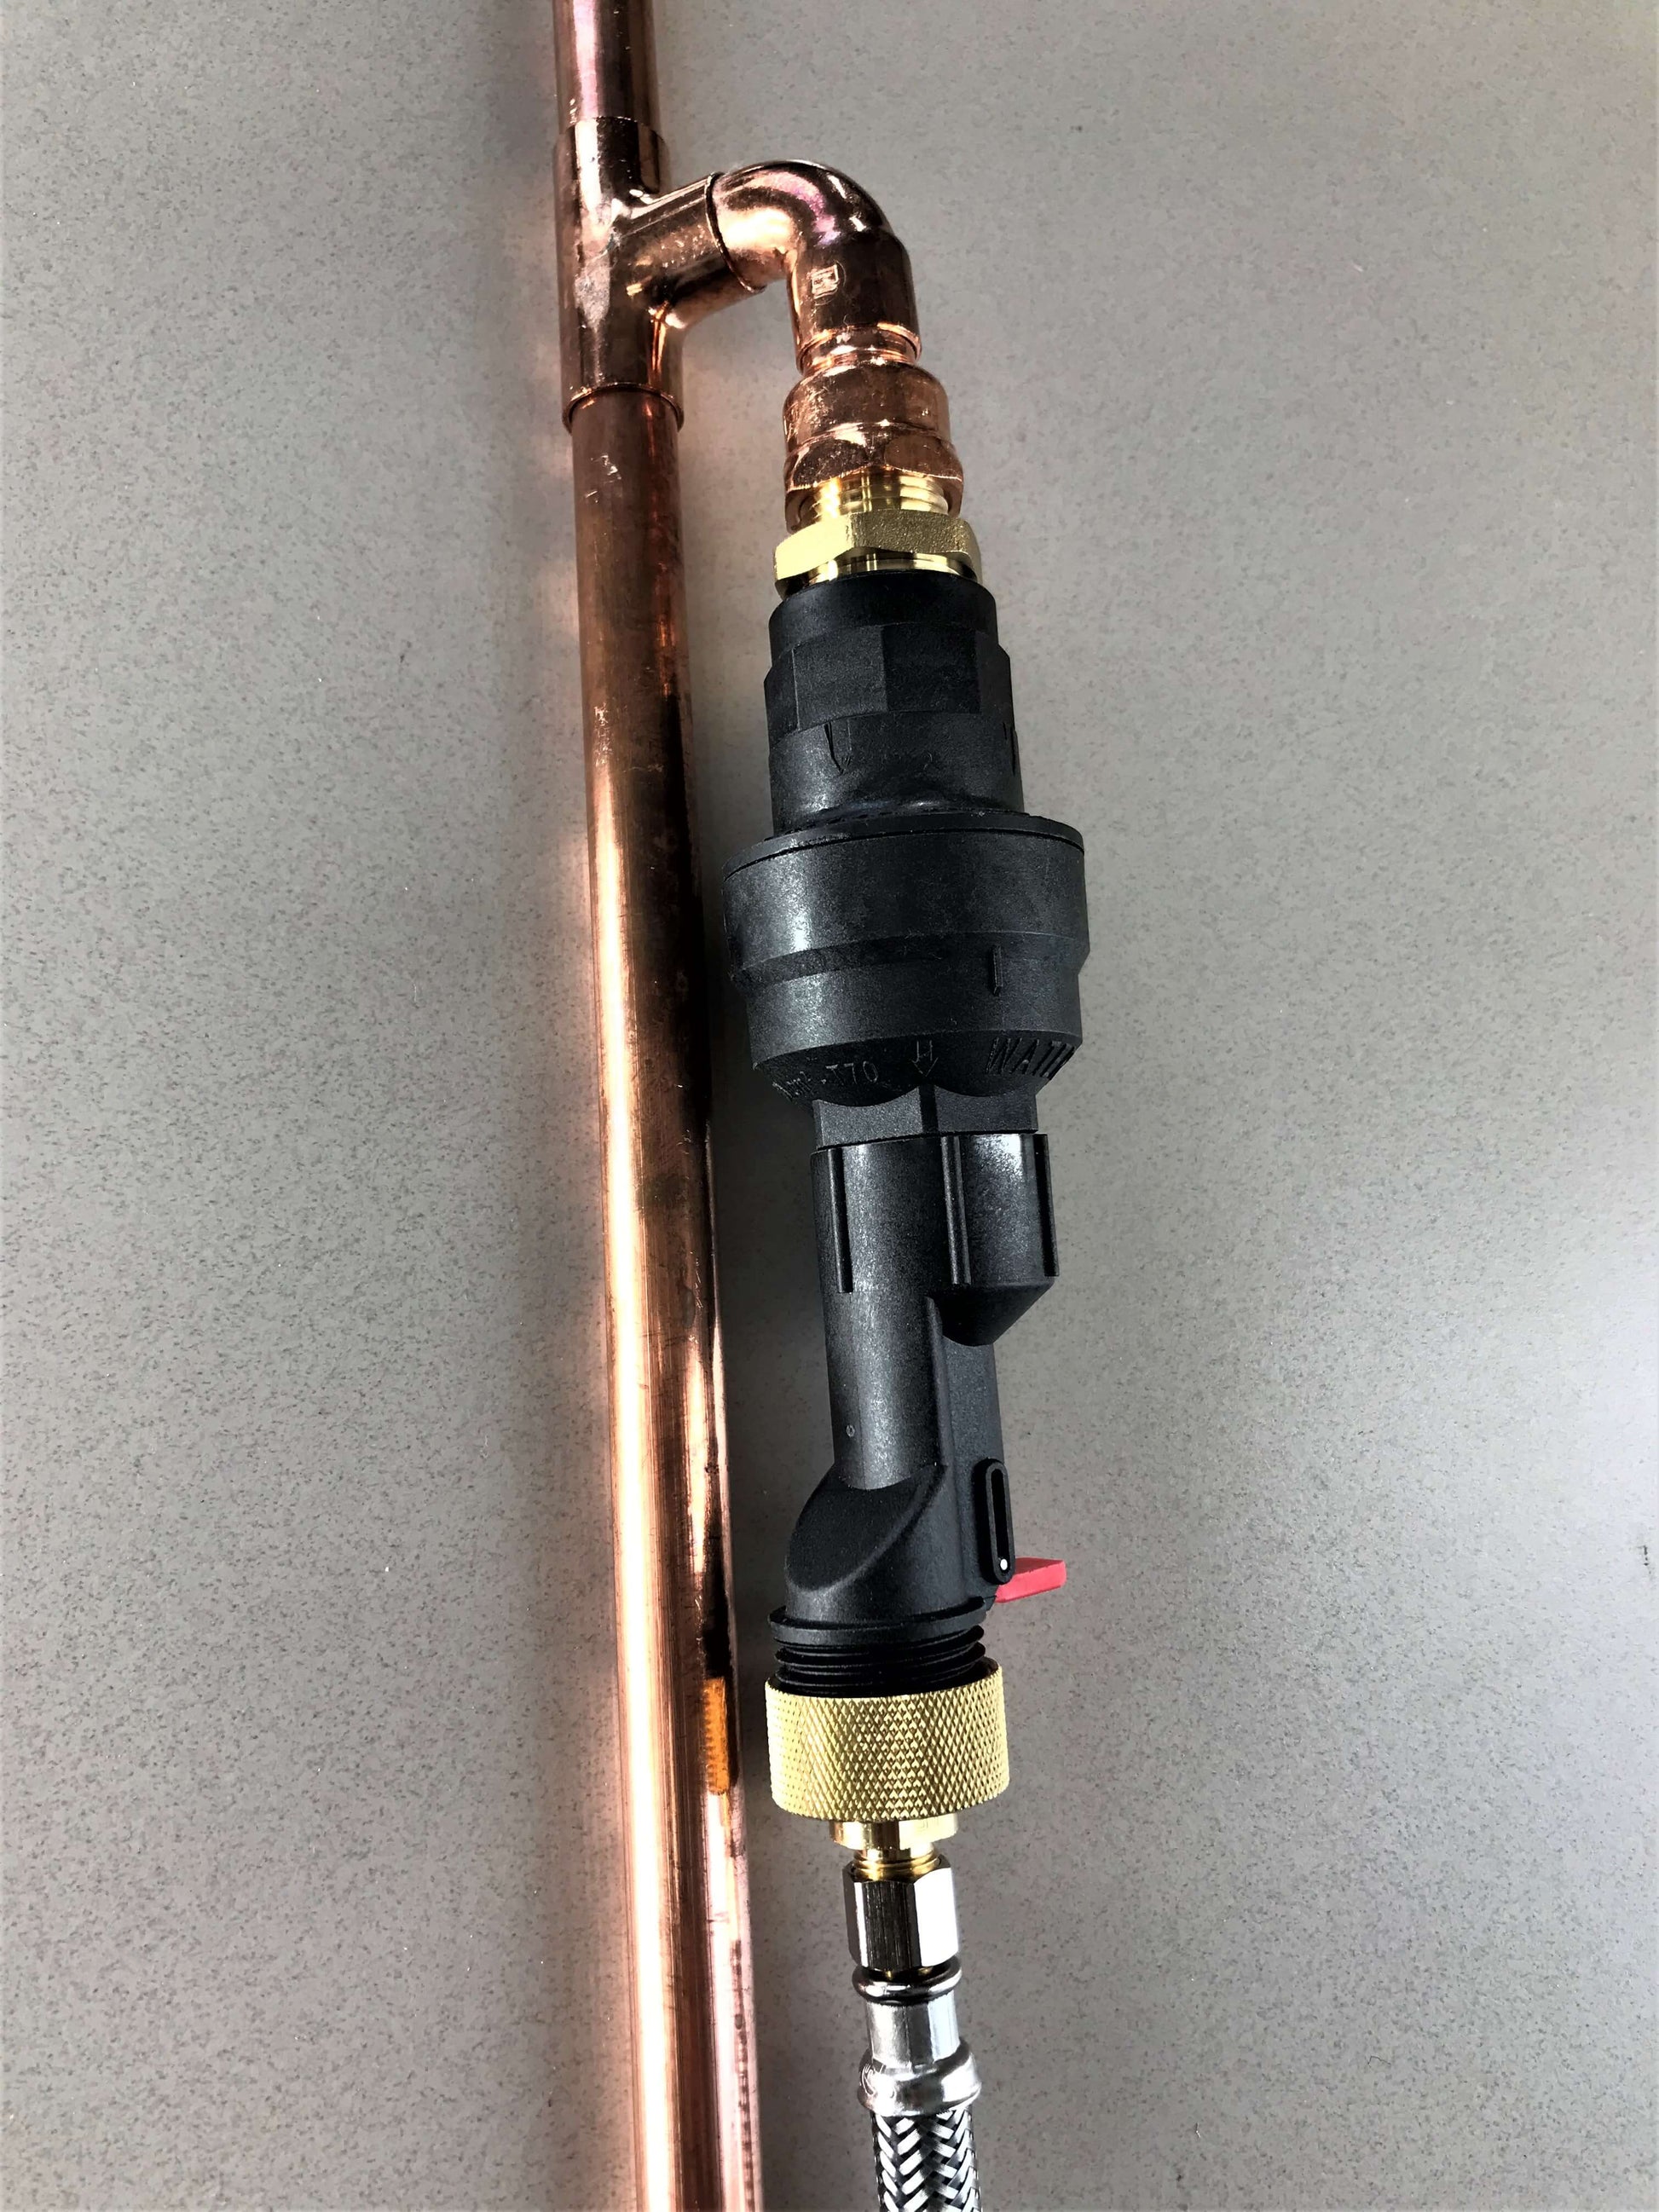 Water Block connected to a copper pipe and 3/8" stainless steel braided water hose.